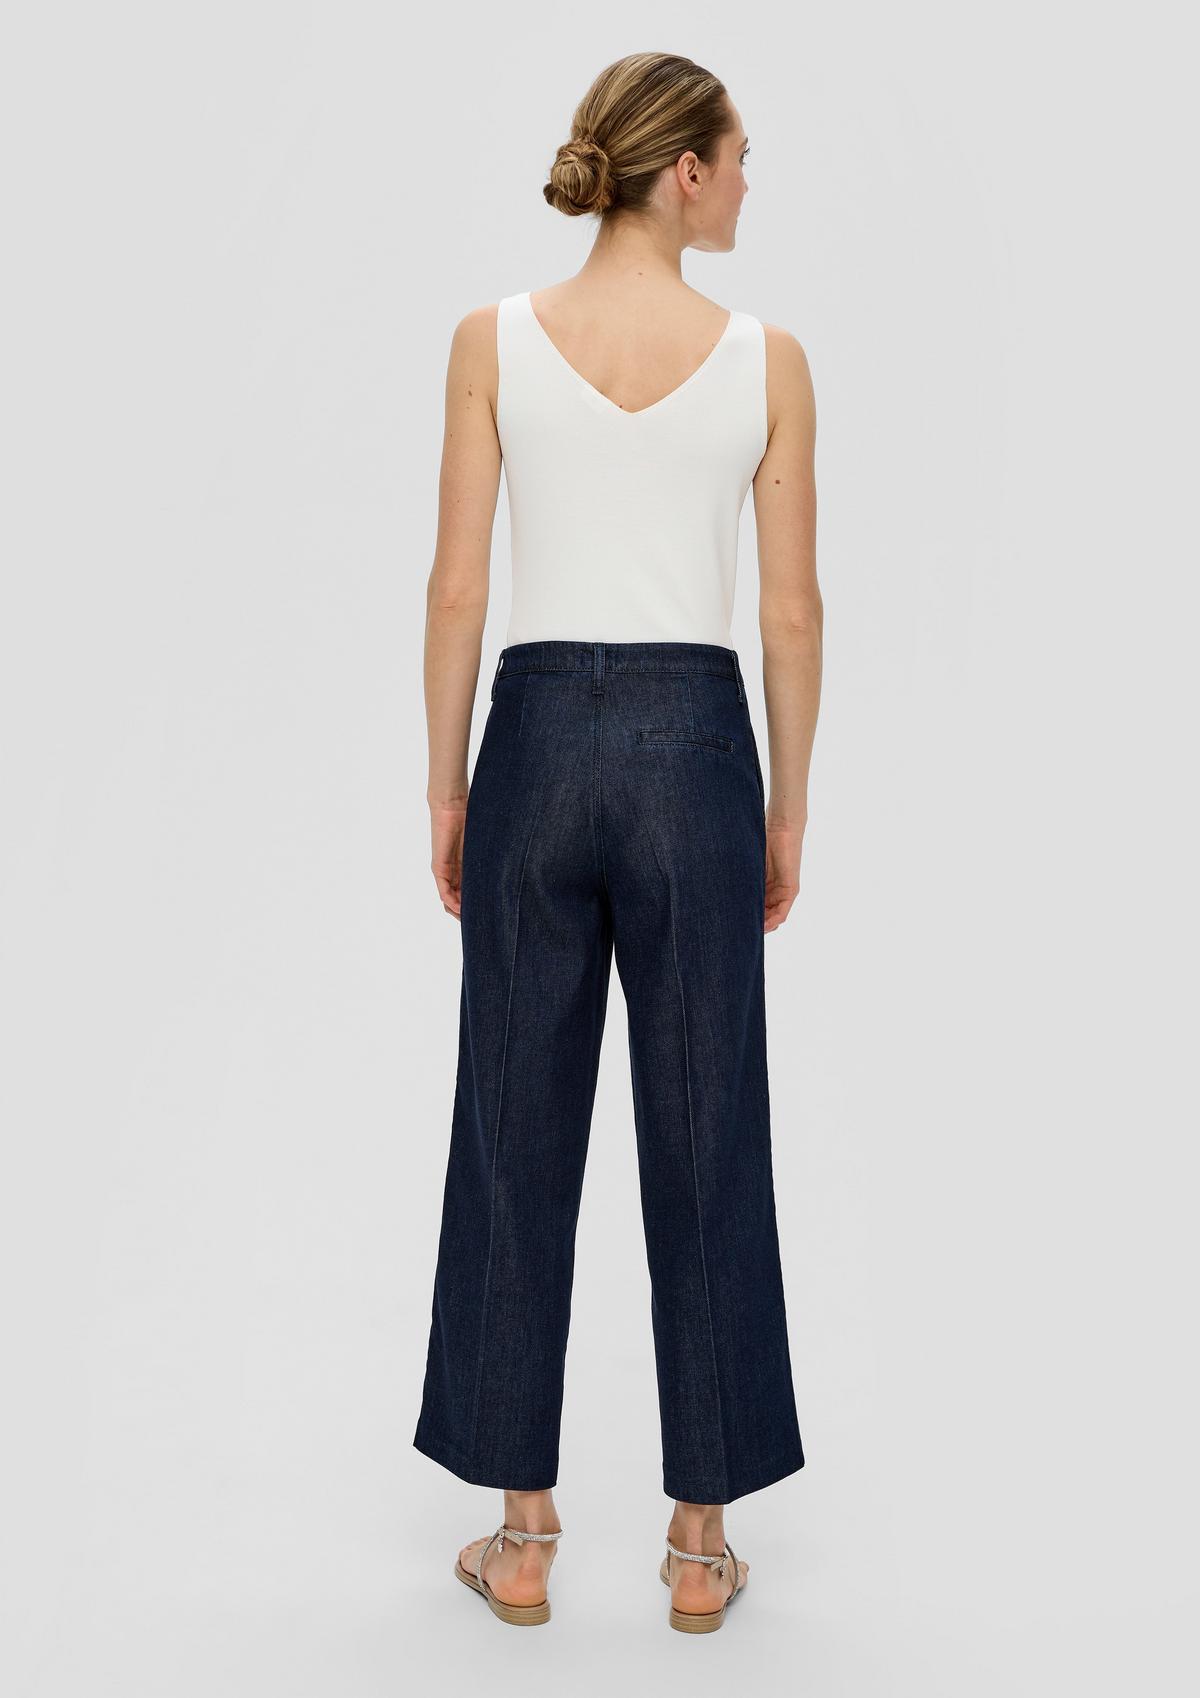 s.Oliver Cropped jeans / relaxed fit / high rise / wide leg